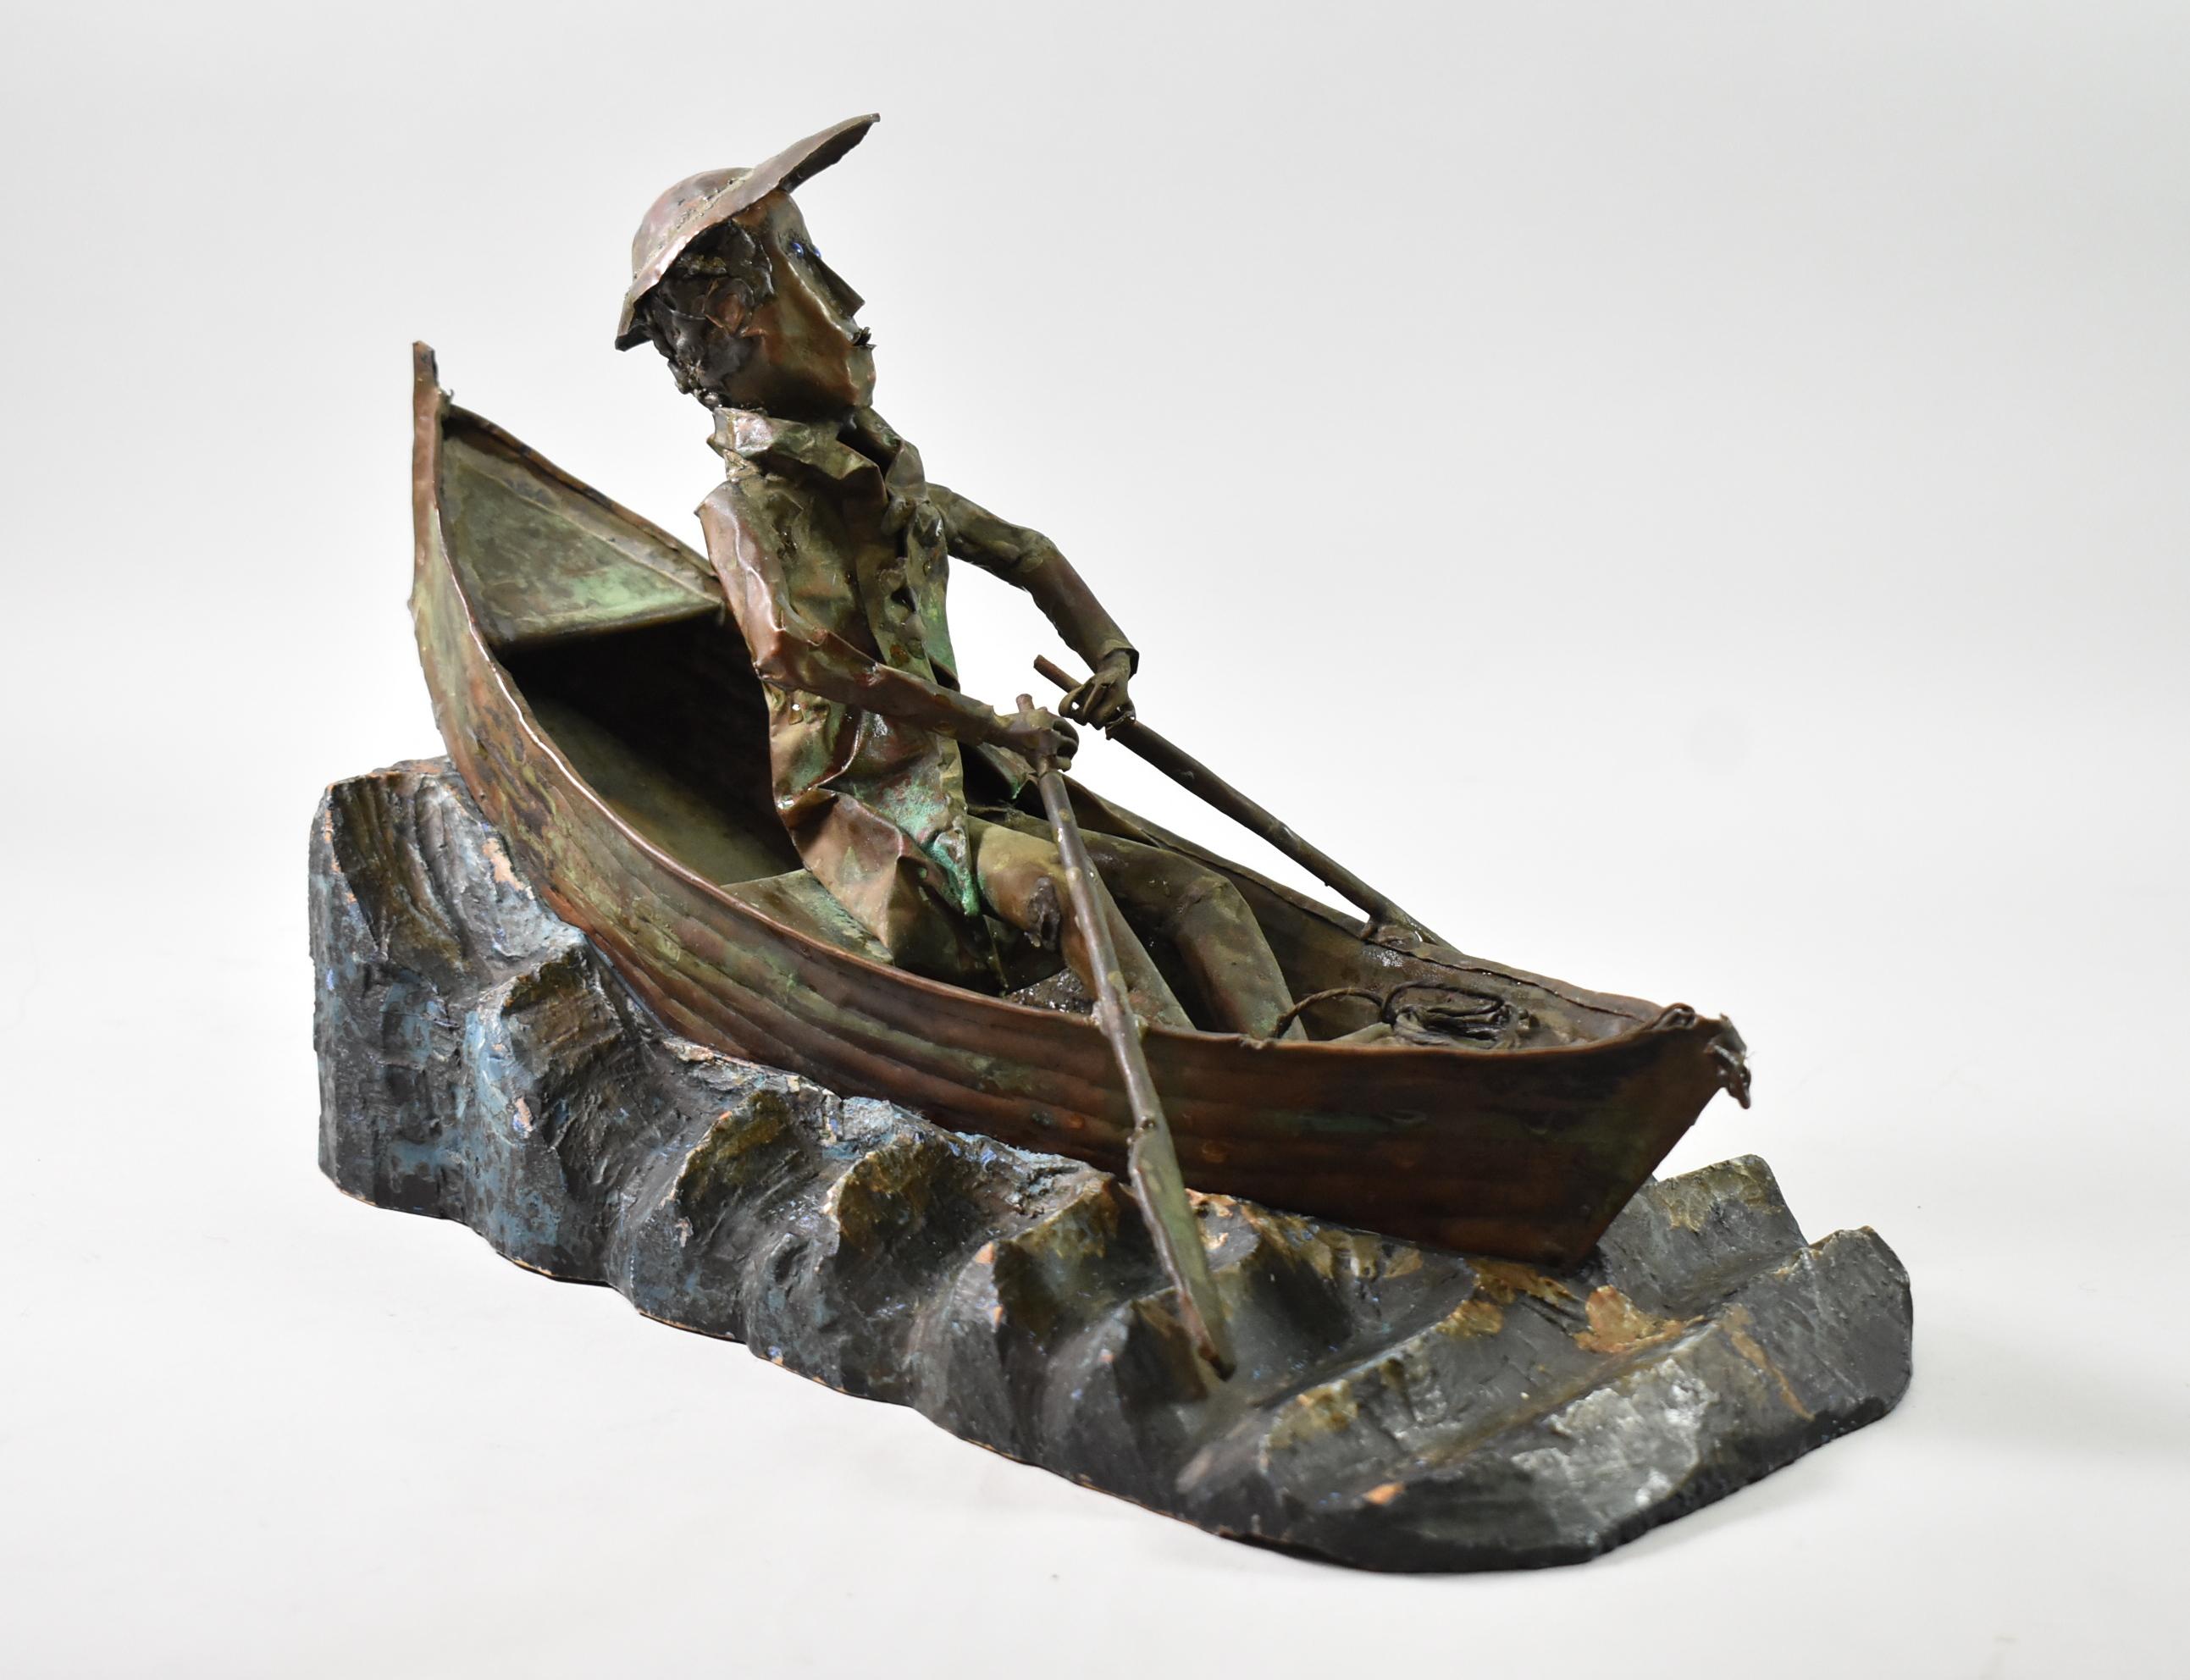 Modern Folk Art Copper Sculpture Man In Row Boat By S.J. Rossbach Circa 1966 For Sale